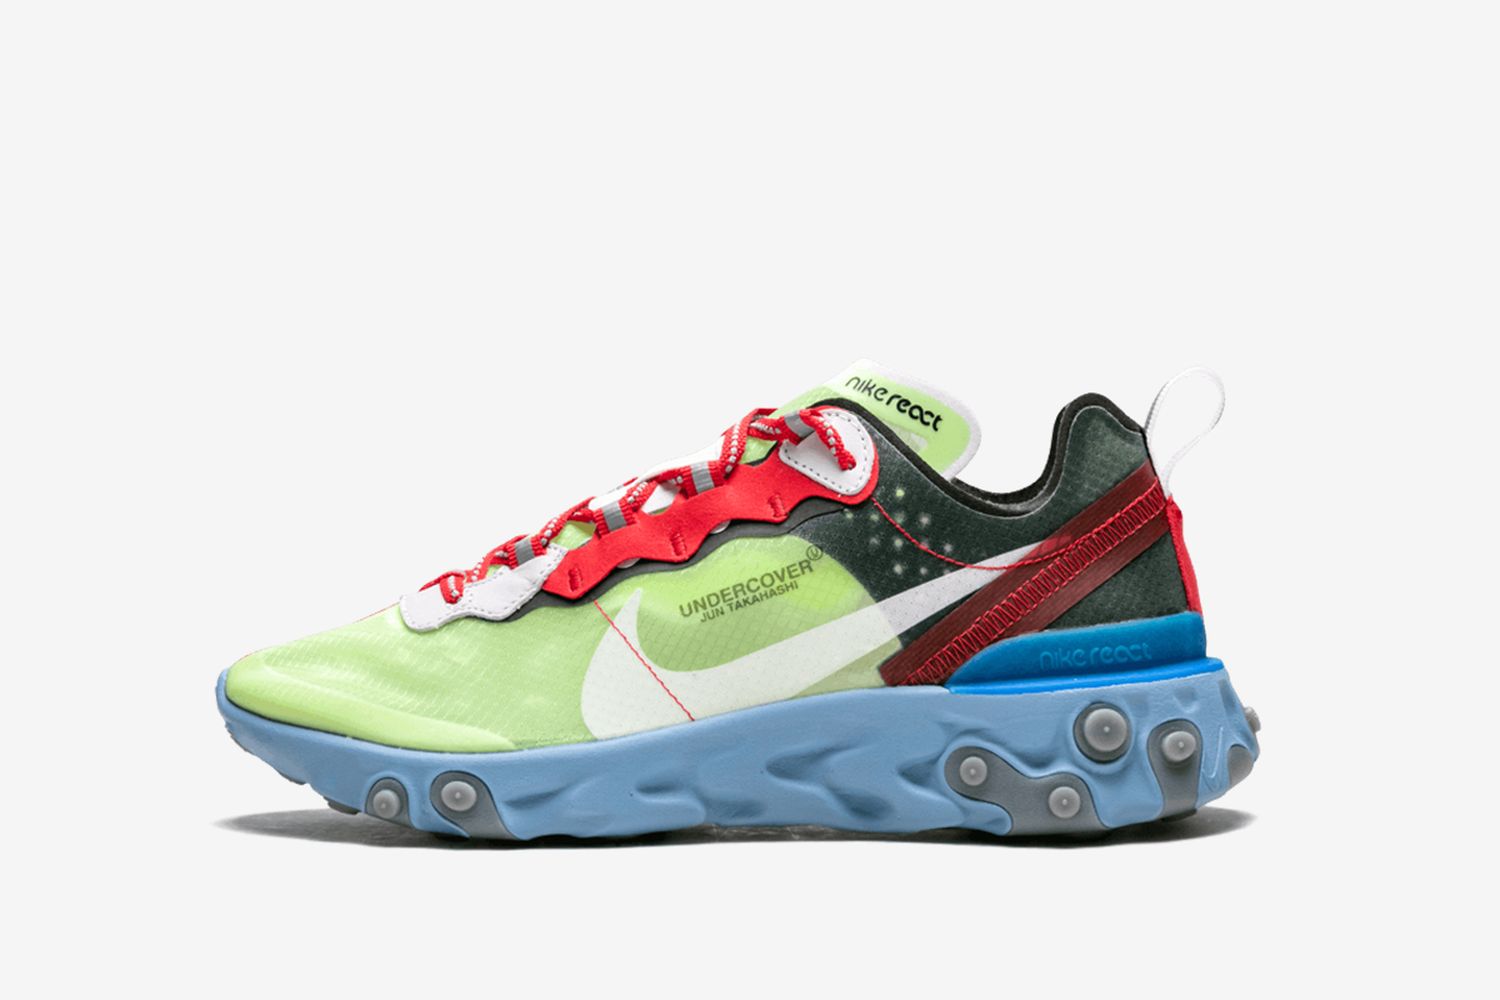 Nike’s React Element 87 is Back and Better Than Ever